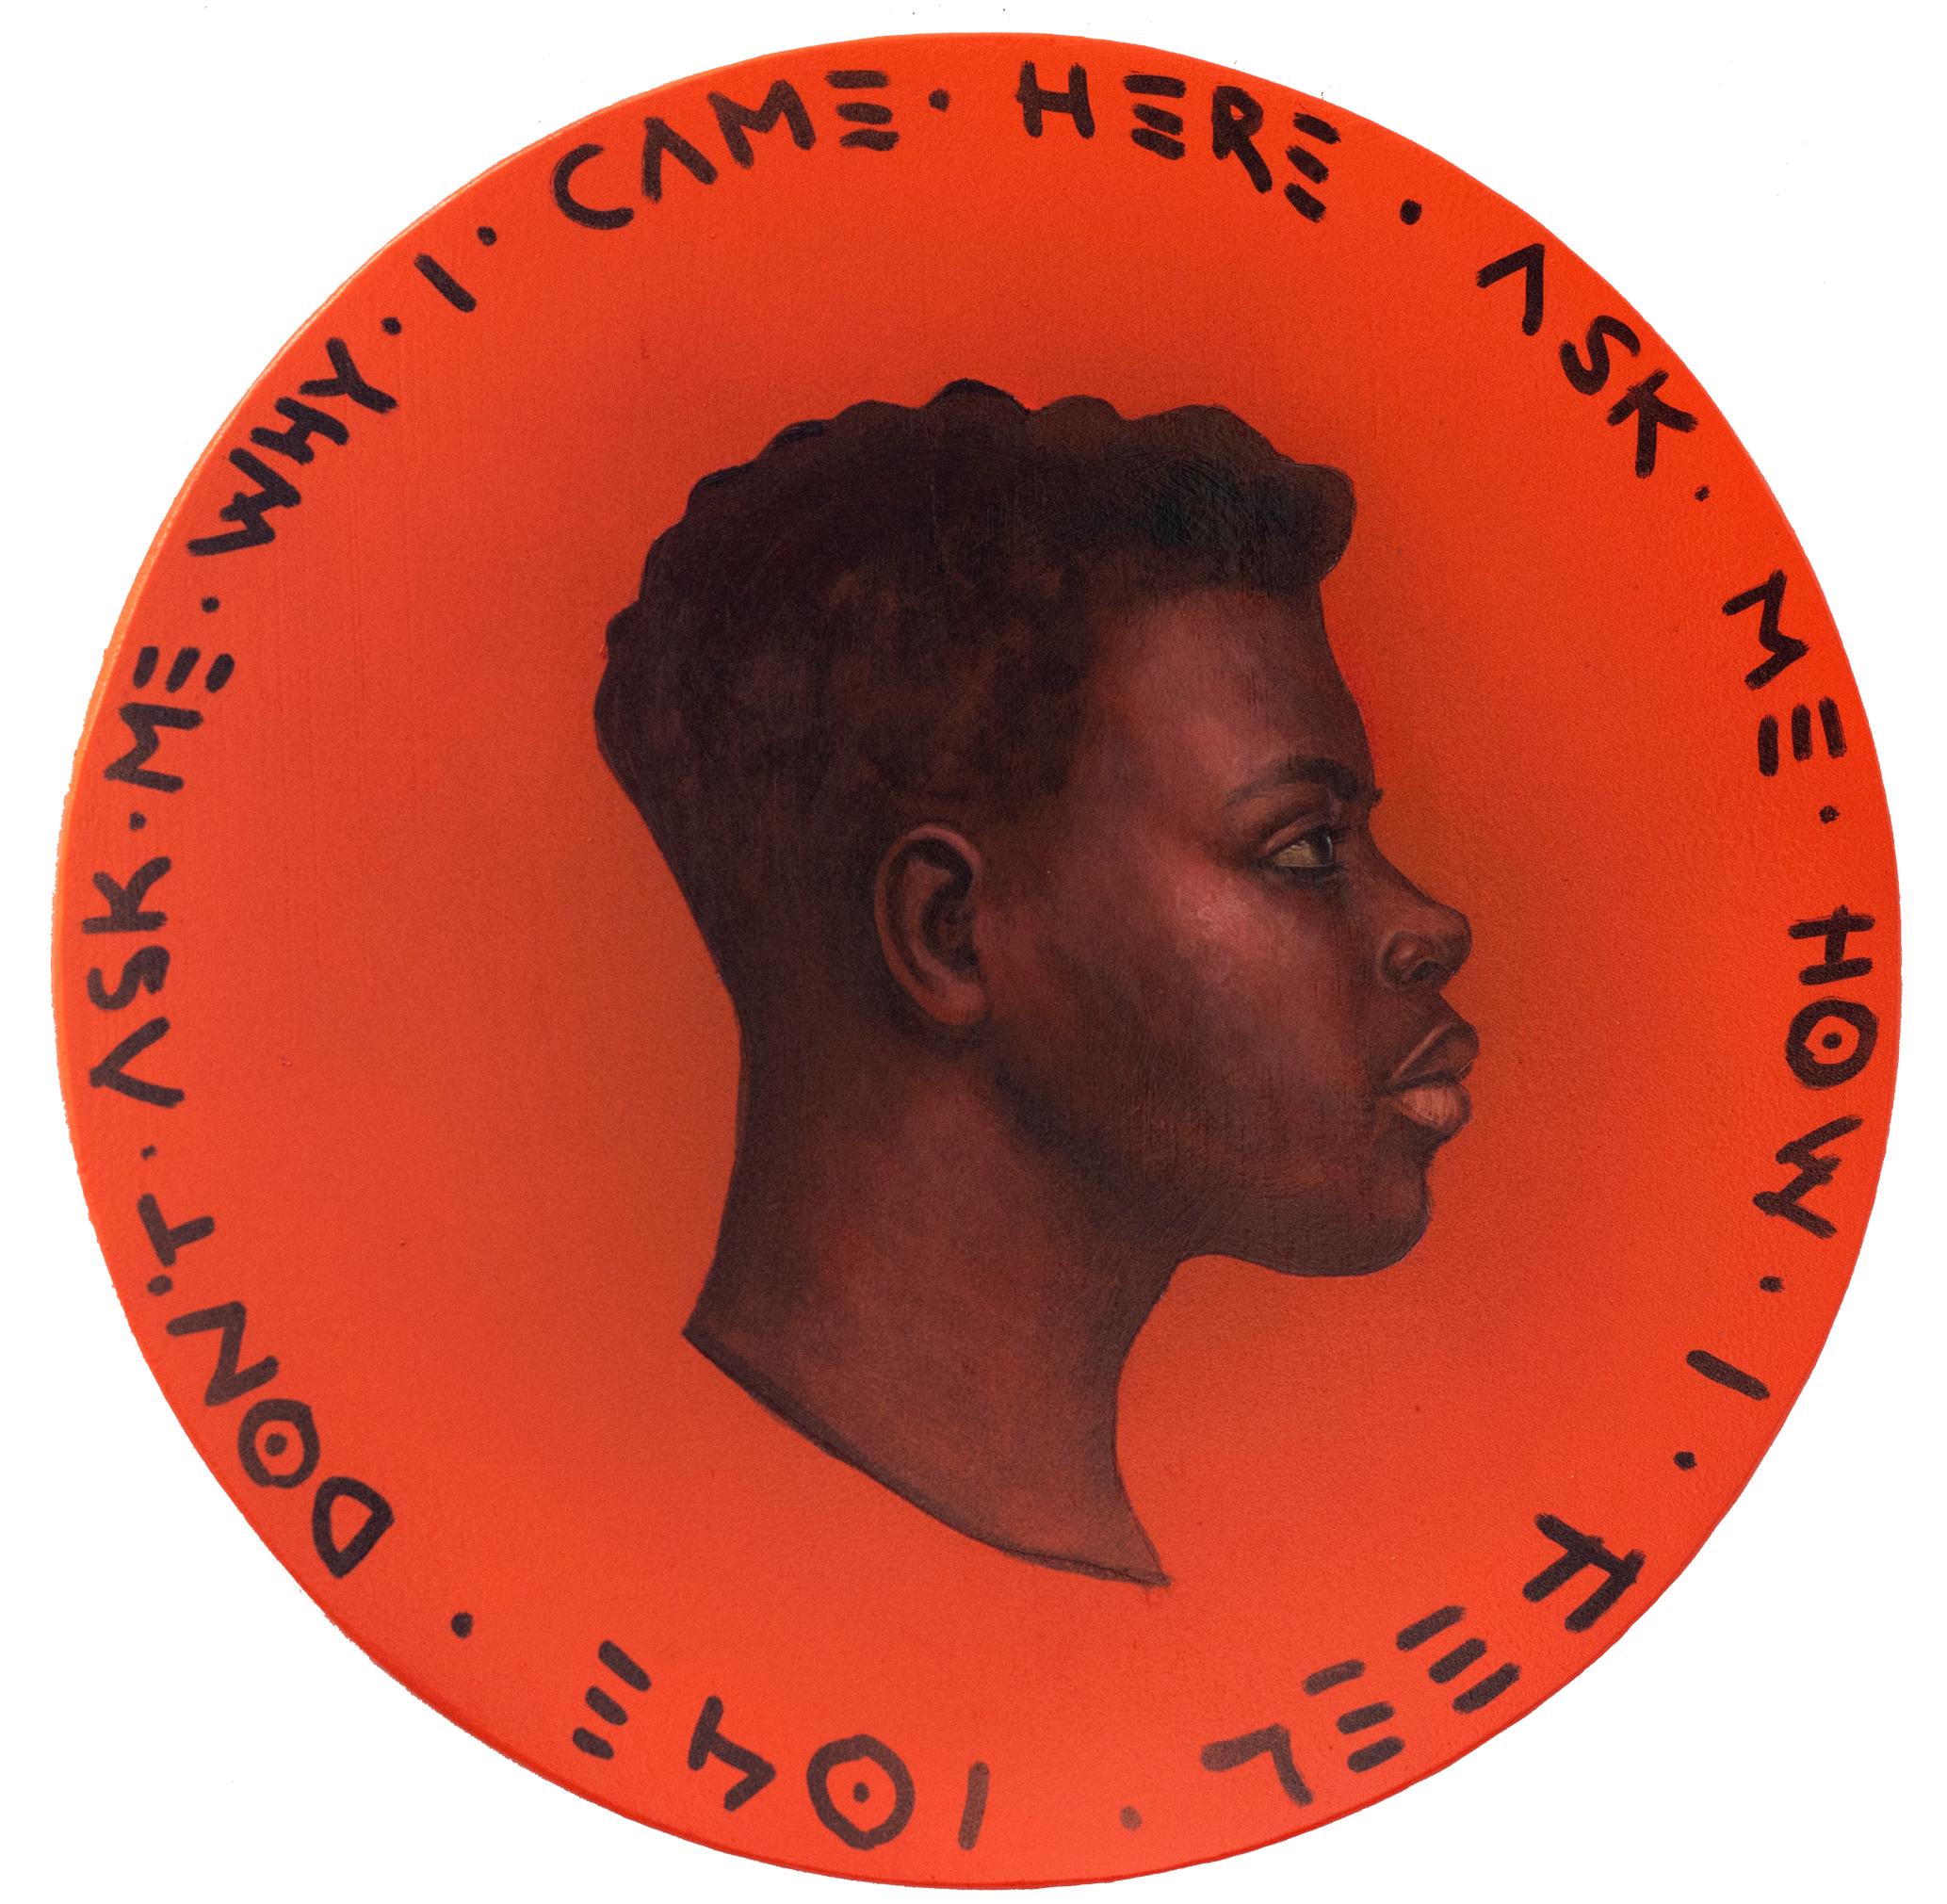 Natasha Lelenco Portrait Painting - Colorful Face Portrait On A Wooden Coin. Black Woman on Orange "Currency #197"